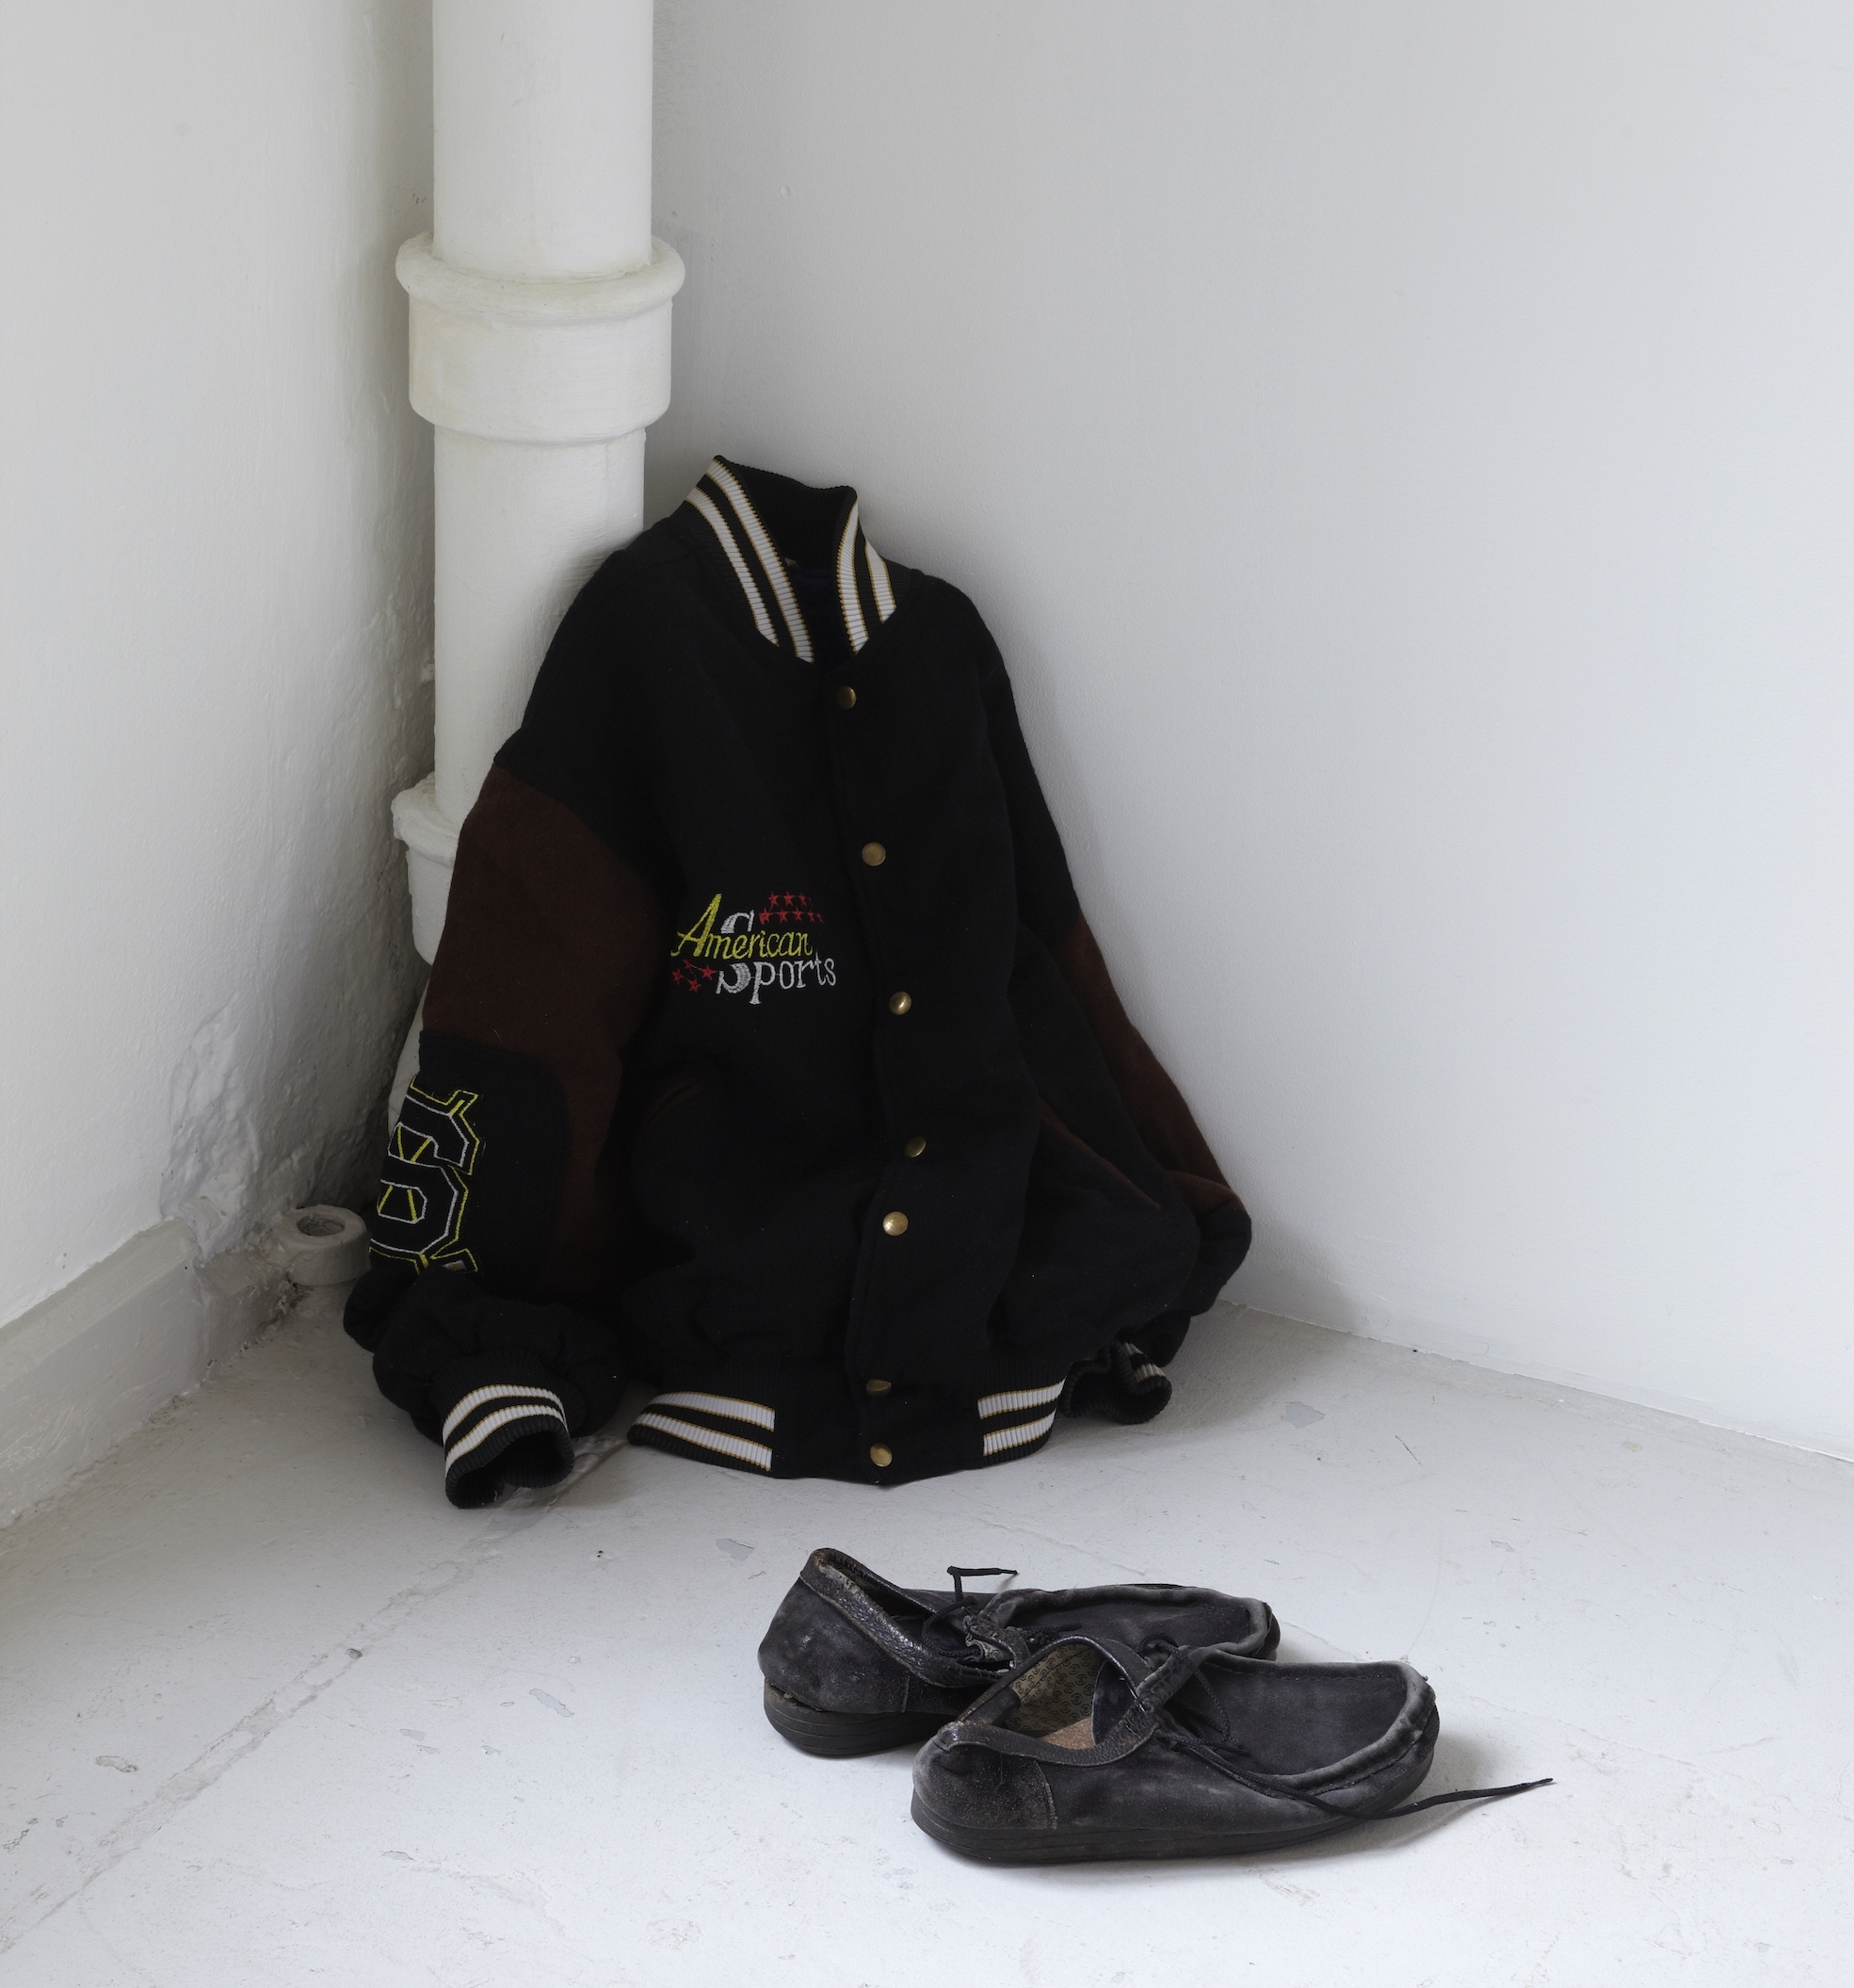  Amel Ibrahimovic  My Refugee Shoes and My Refugee Clothes  (1998) Shoes and jacket placed in a corner, dimensions variable Courtesy the artist 